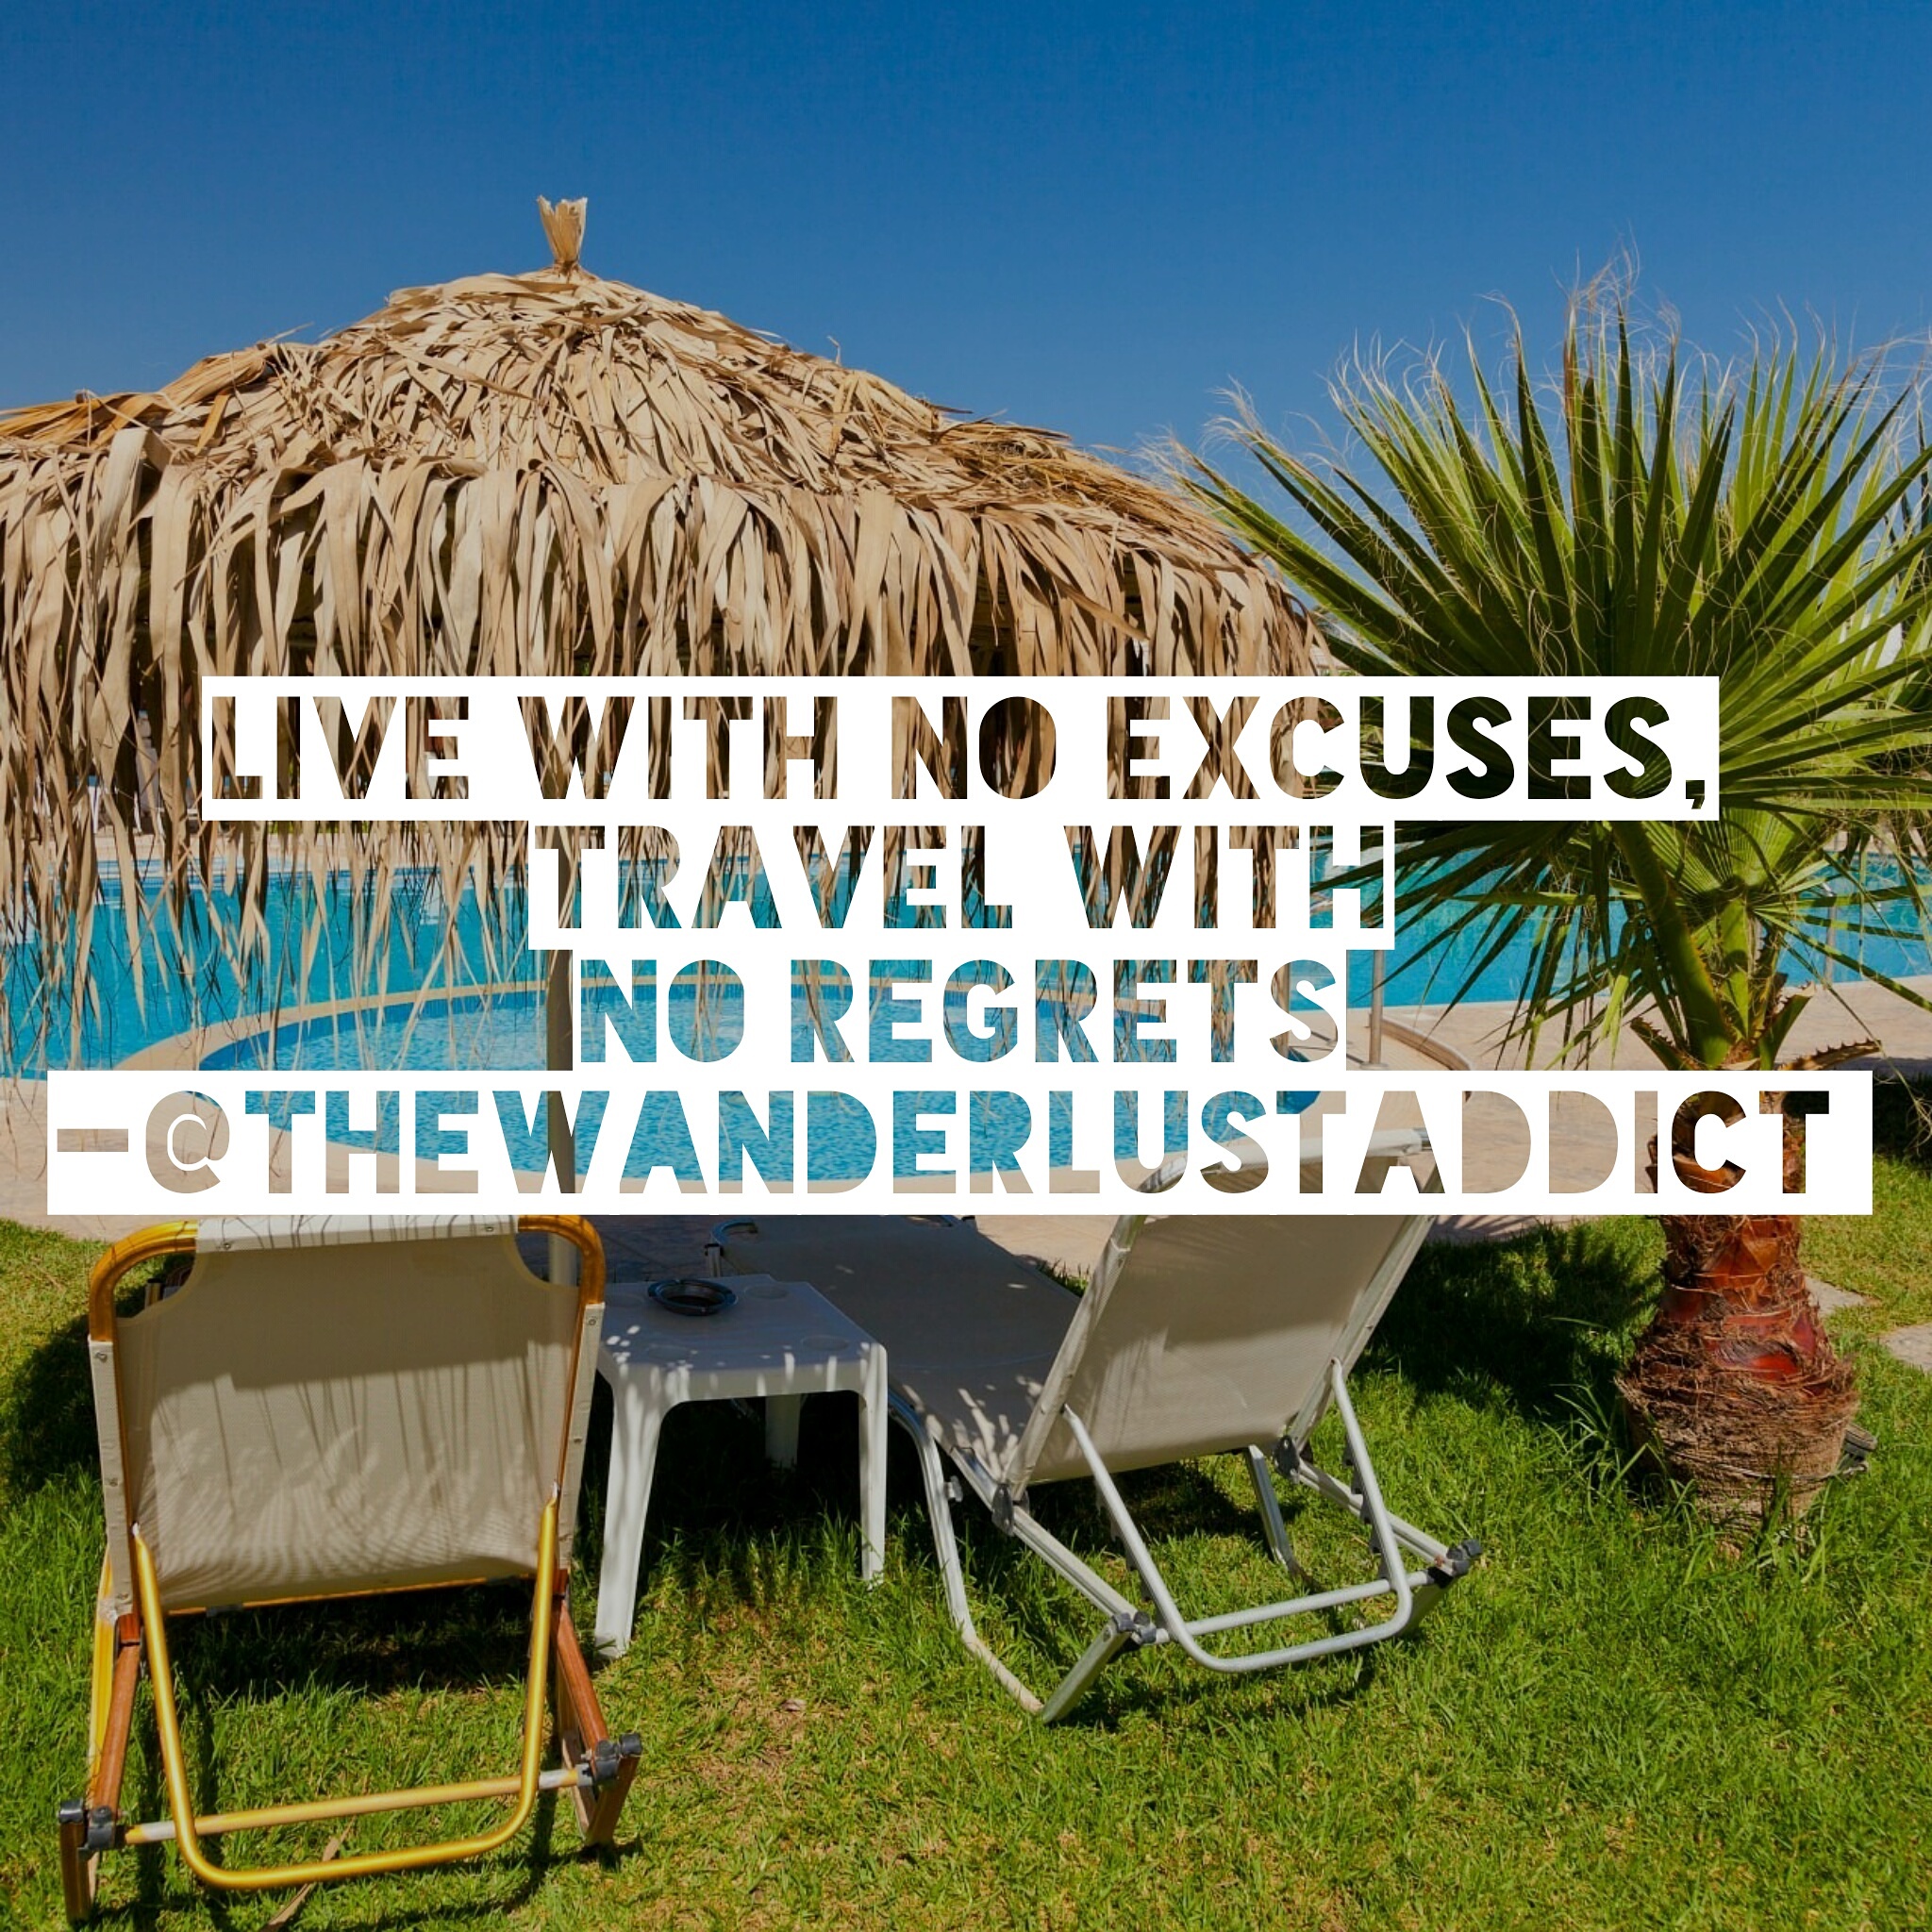 Live with no excuses, travel with no regrets